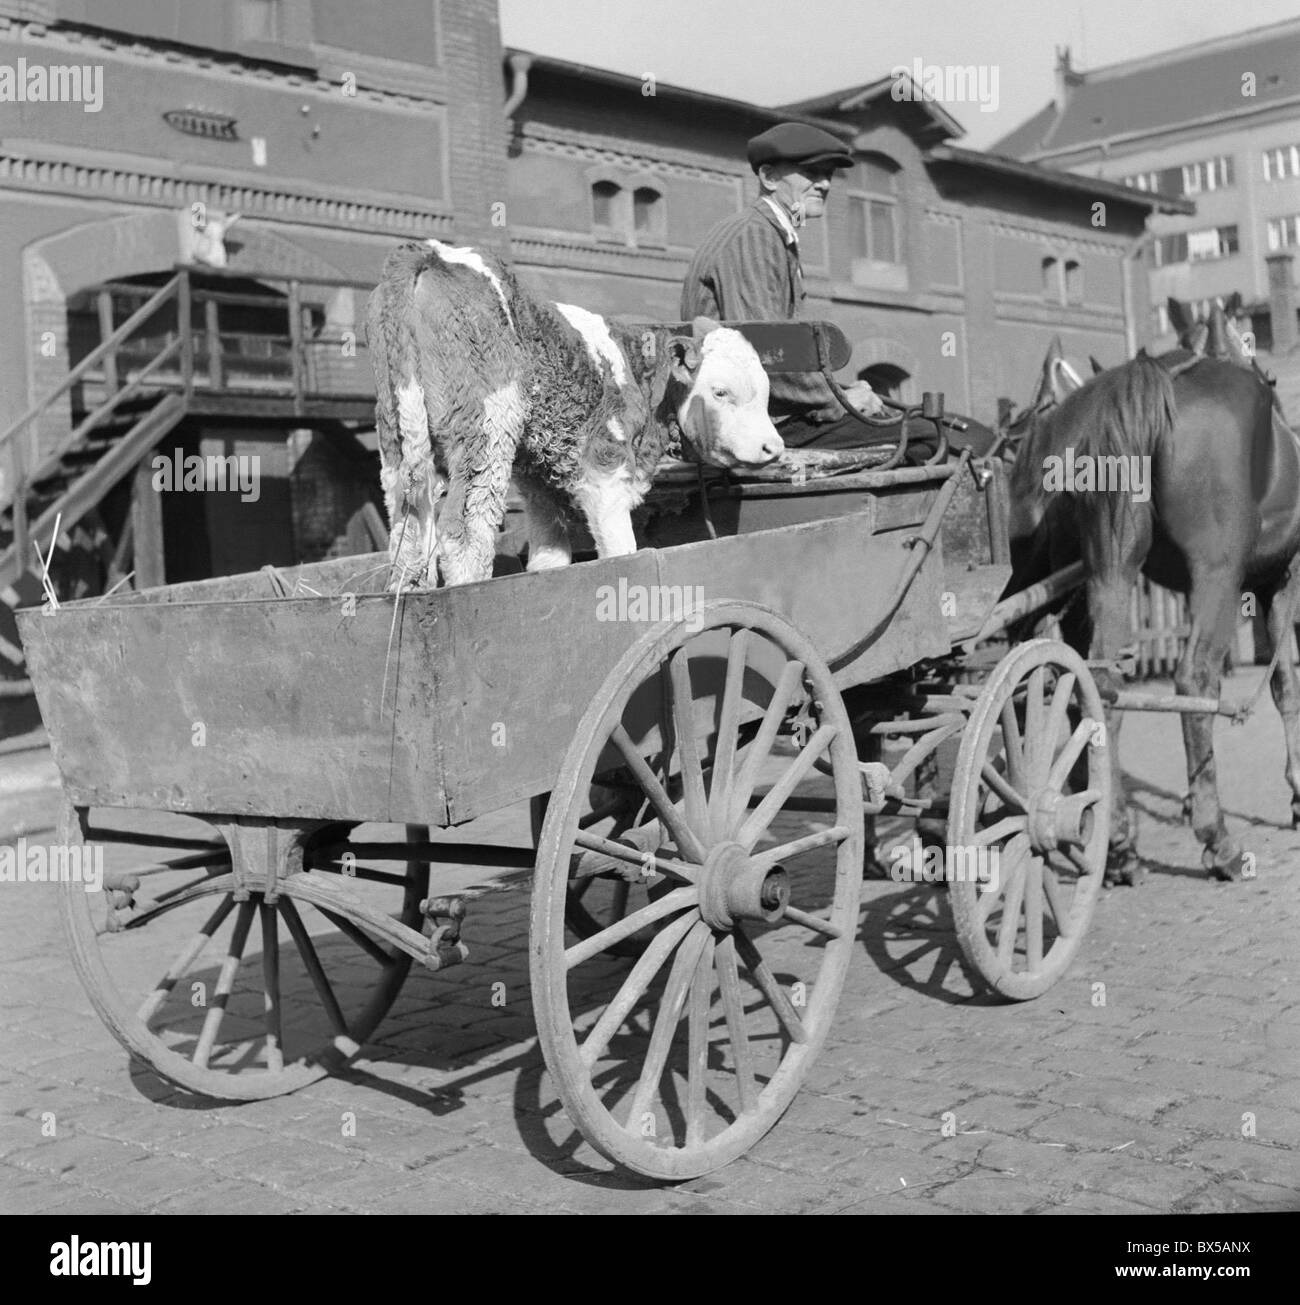 Vintage Black and White Photo Reprint Barn Cows Horses Carriage People Farm 